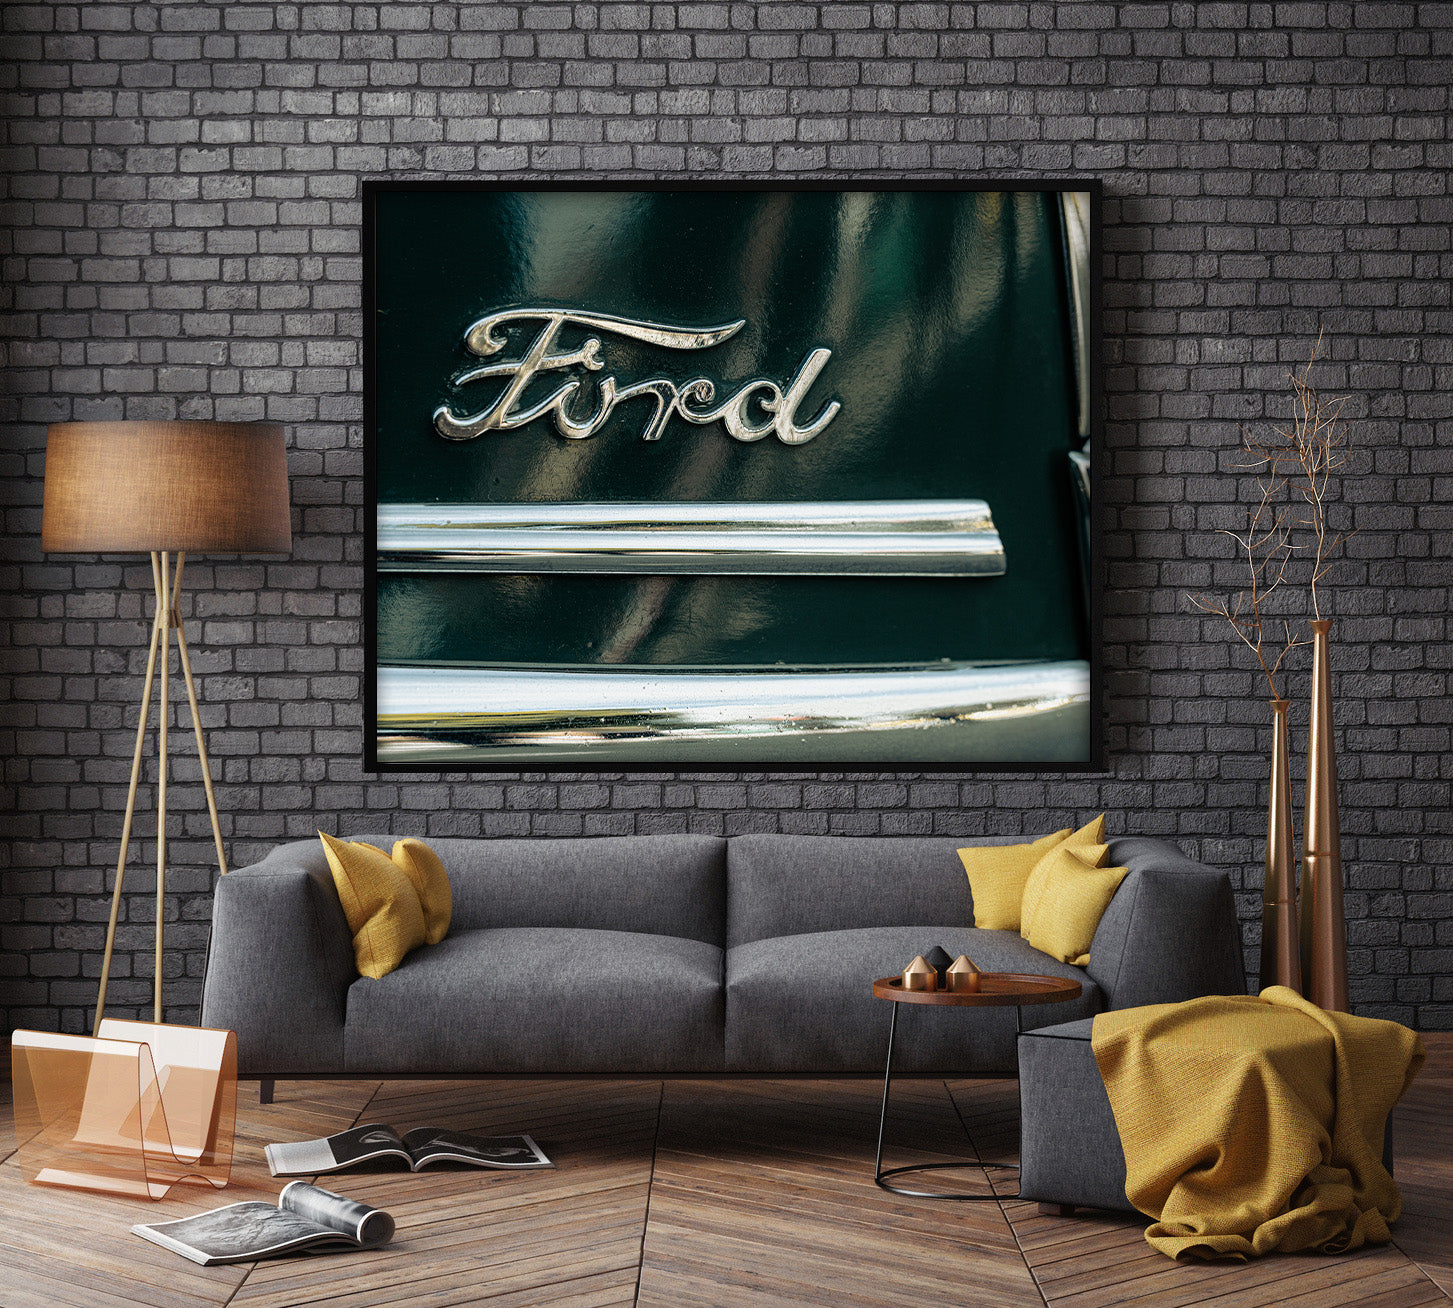 1939 Ford Coupe Convertible car print photography